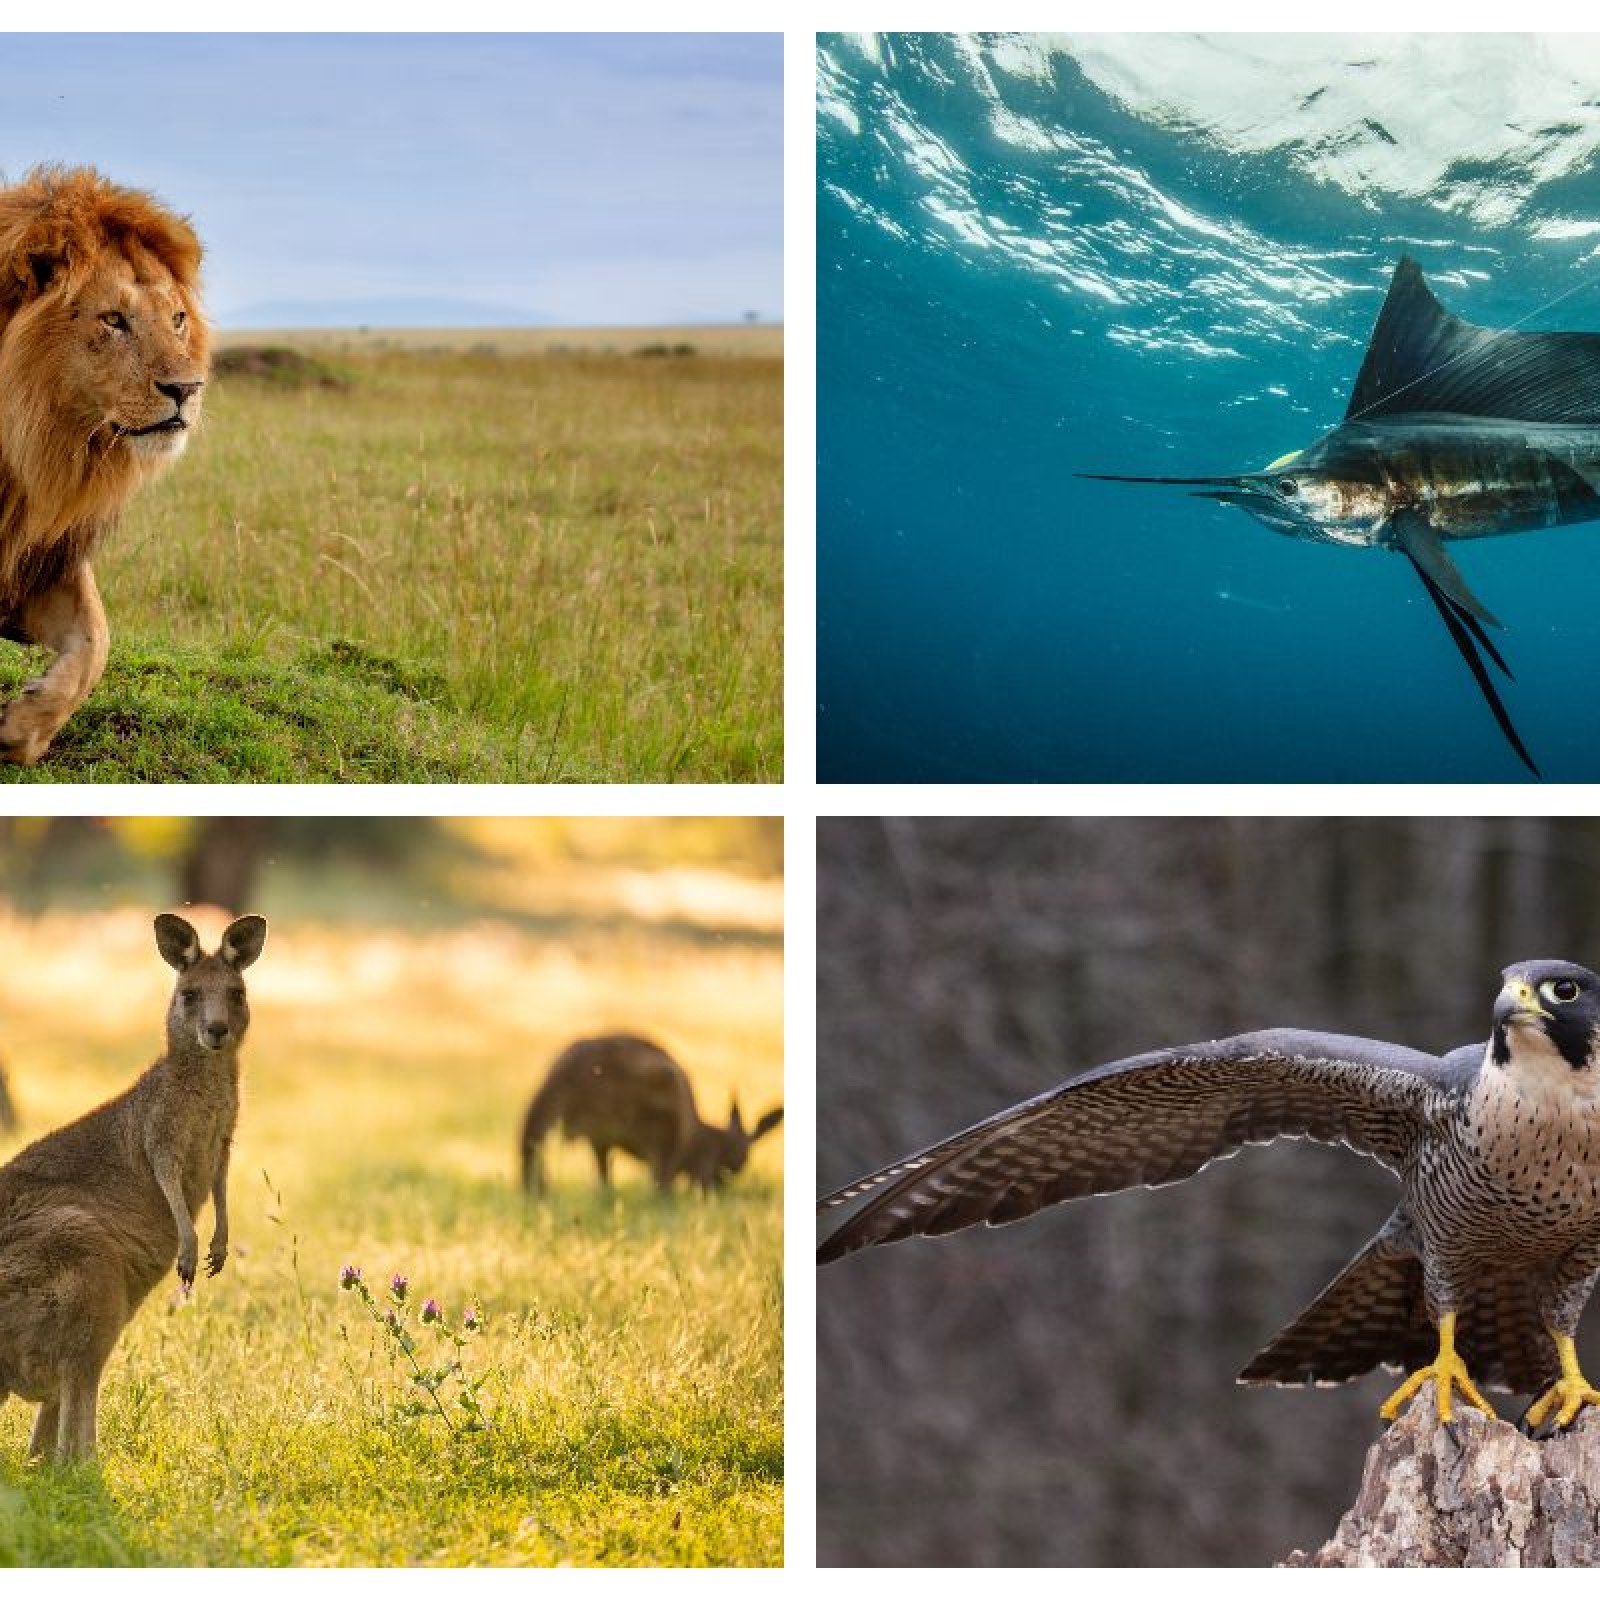 In Pictures: The Fastest Animals on Earth